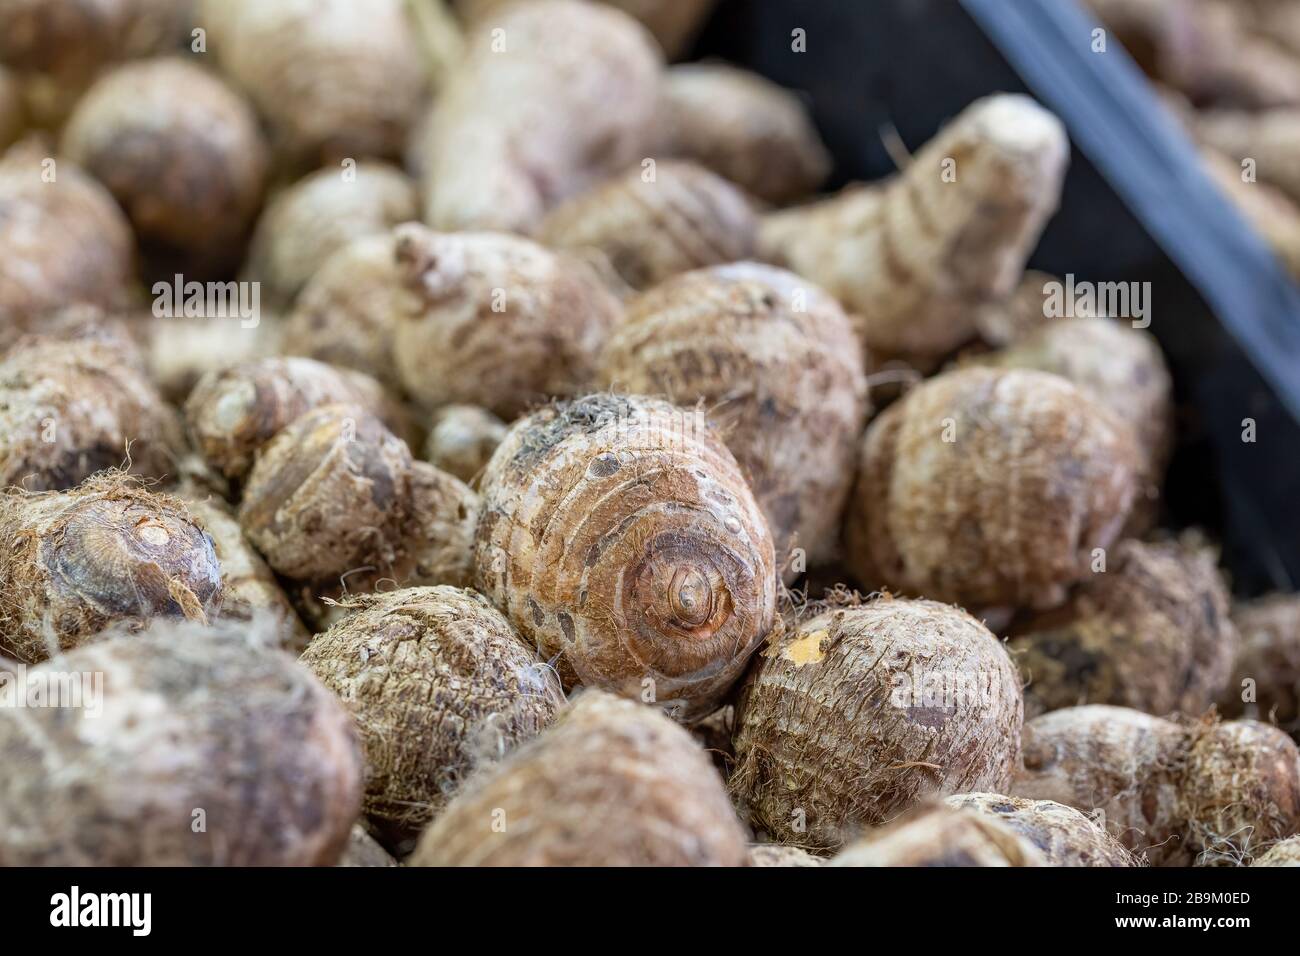 Pile of raw, unpeeled tropical Taro corms, Colocasia esculenta, on a market stall in Ealing, West London Stock Photo